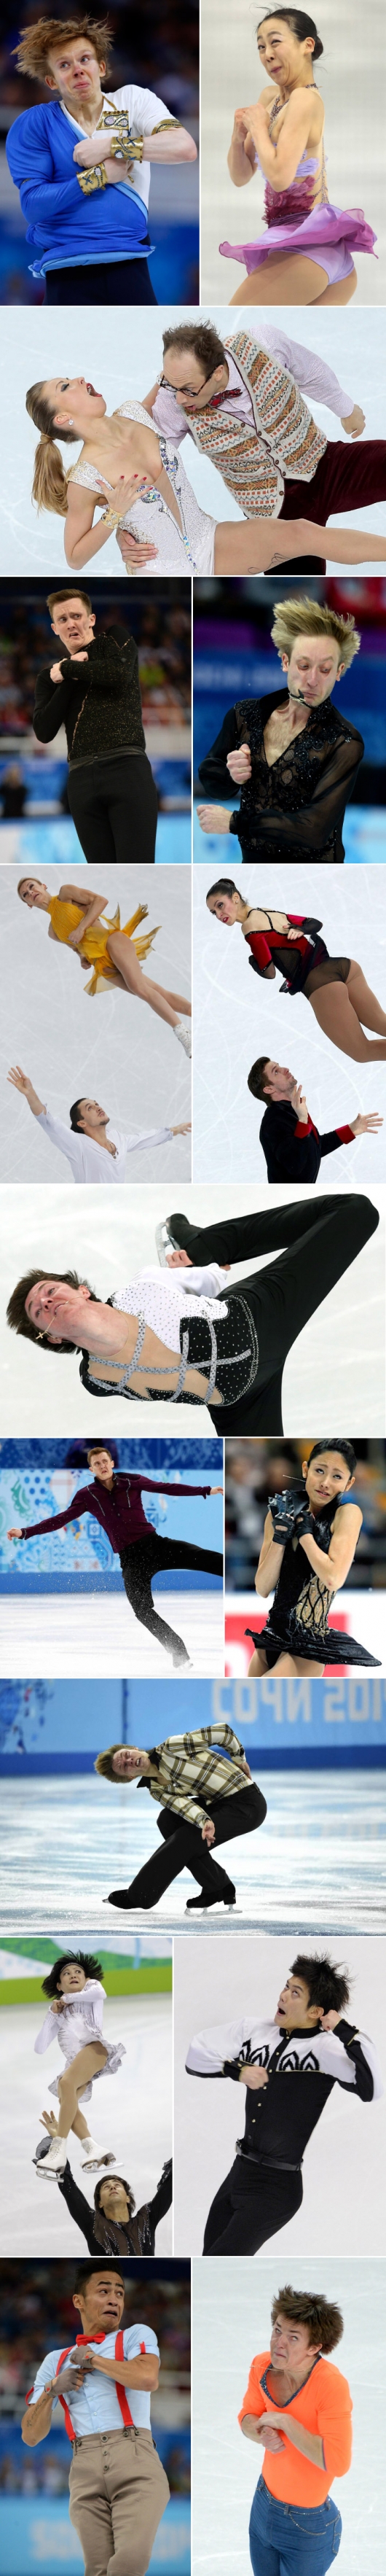 Sochi Winter Olympics 2014 funny faces pictures